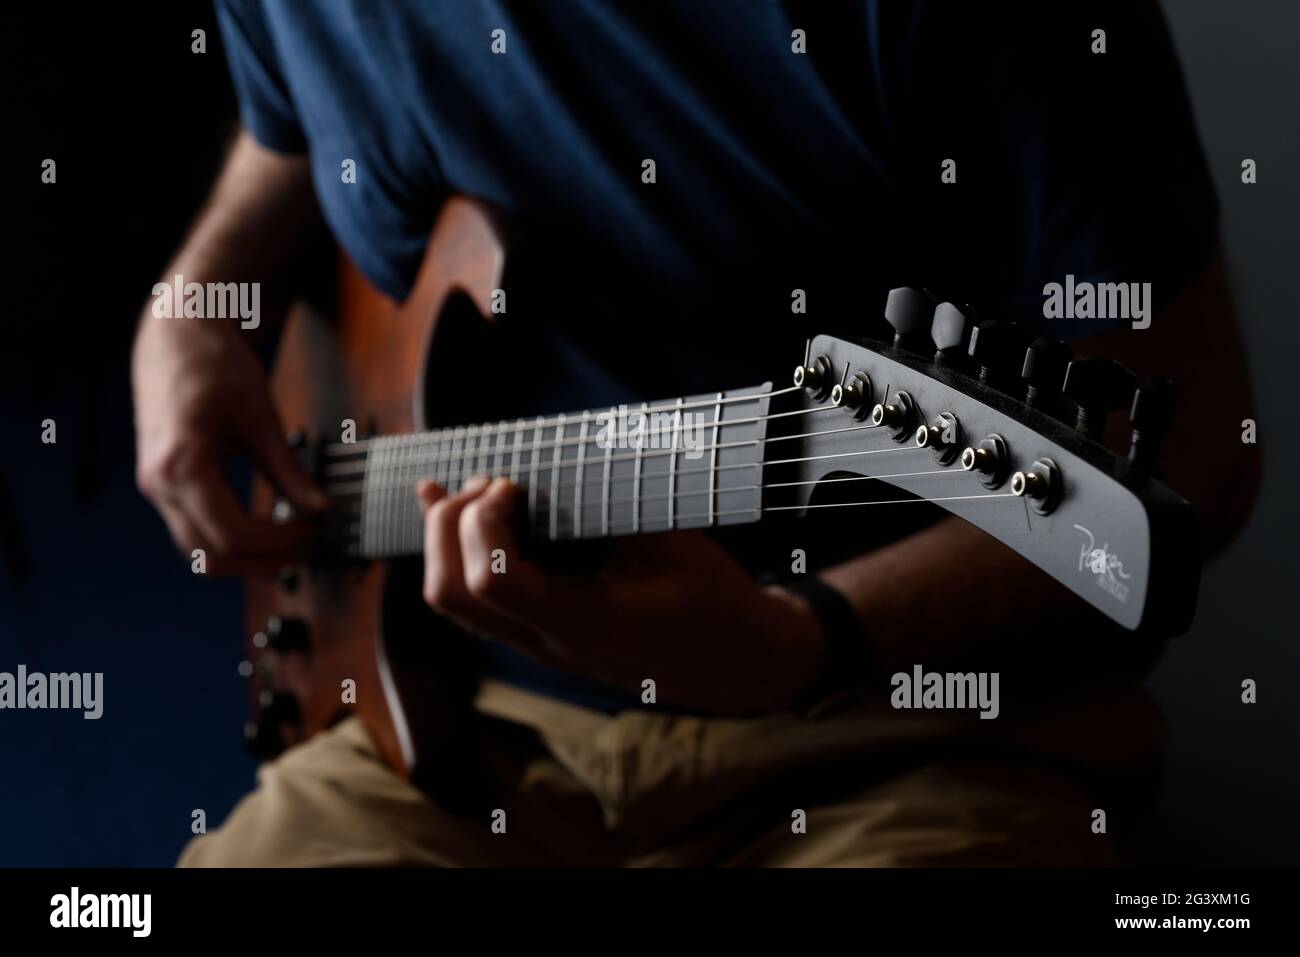 Close up of a man playing a guitar. Dark background, blue shirt and selective focus. Stock Photo